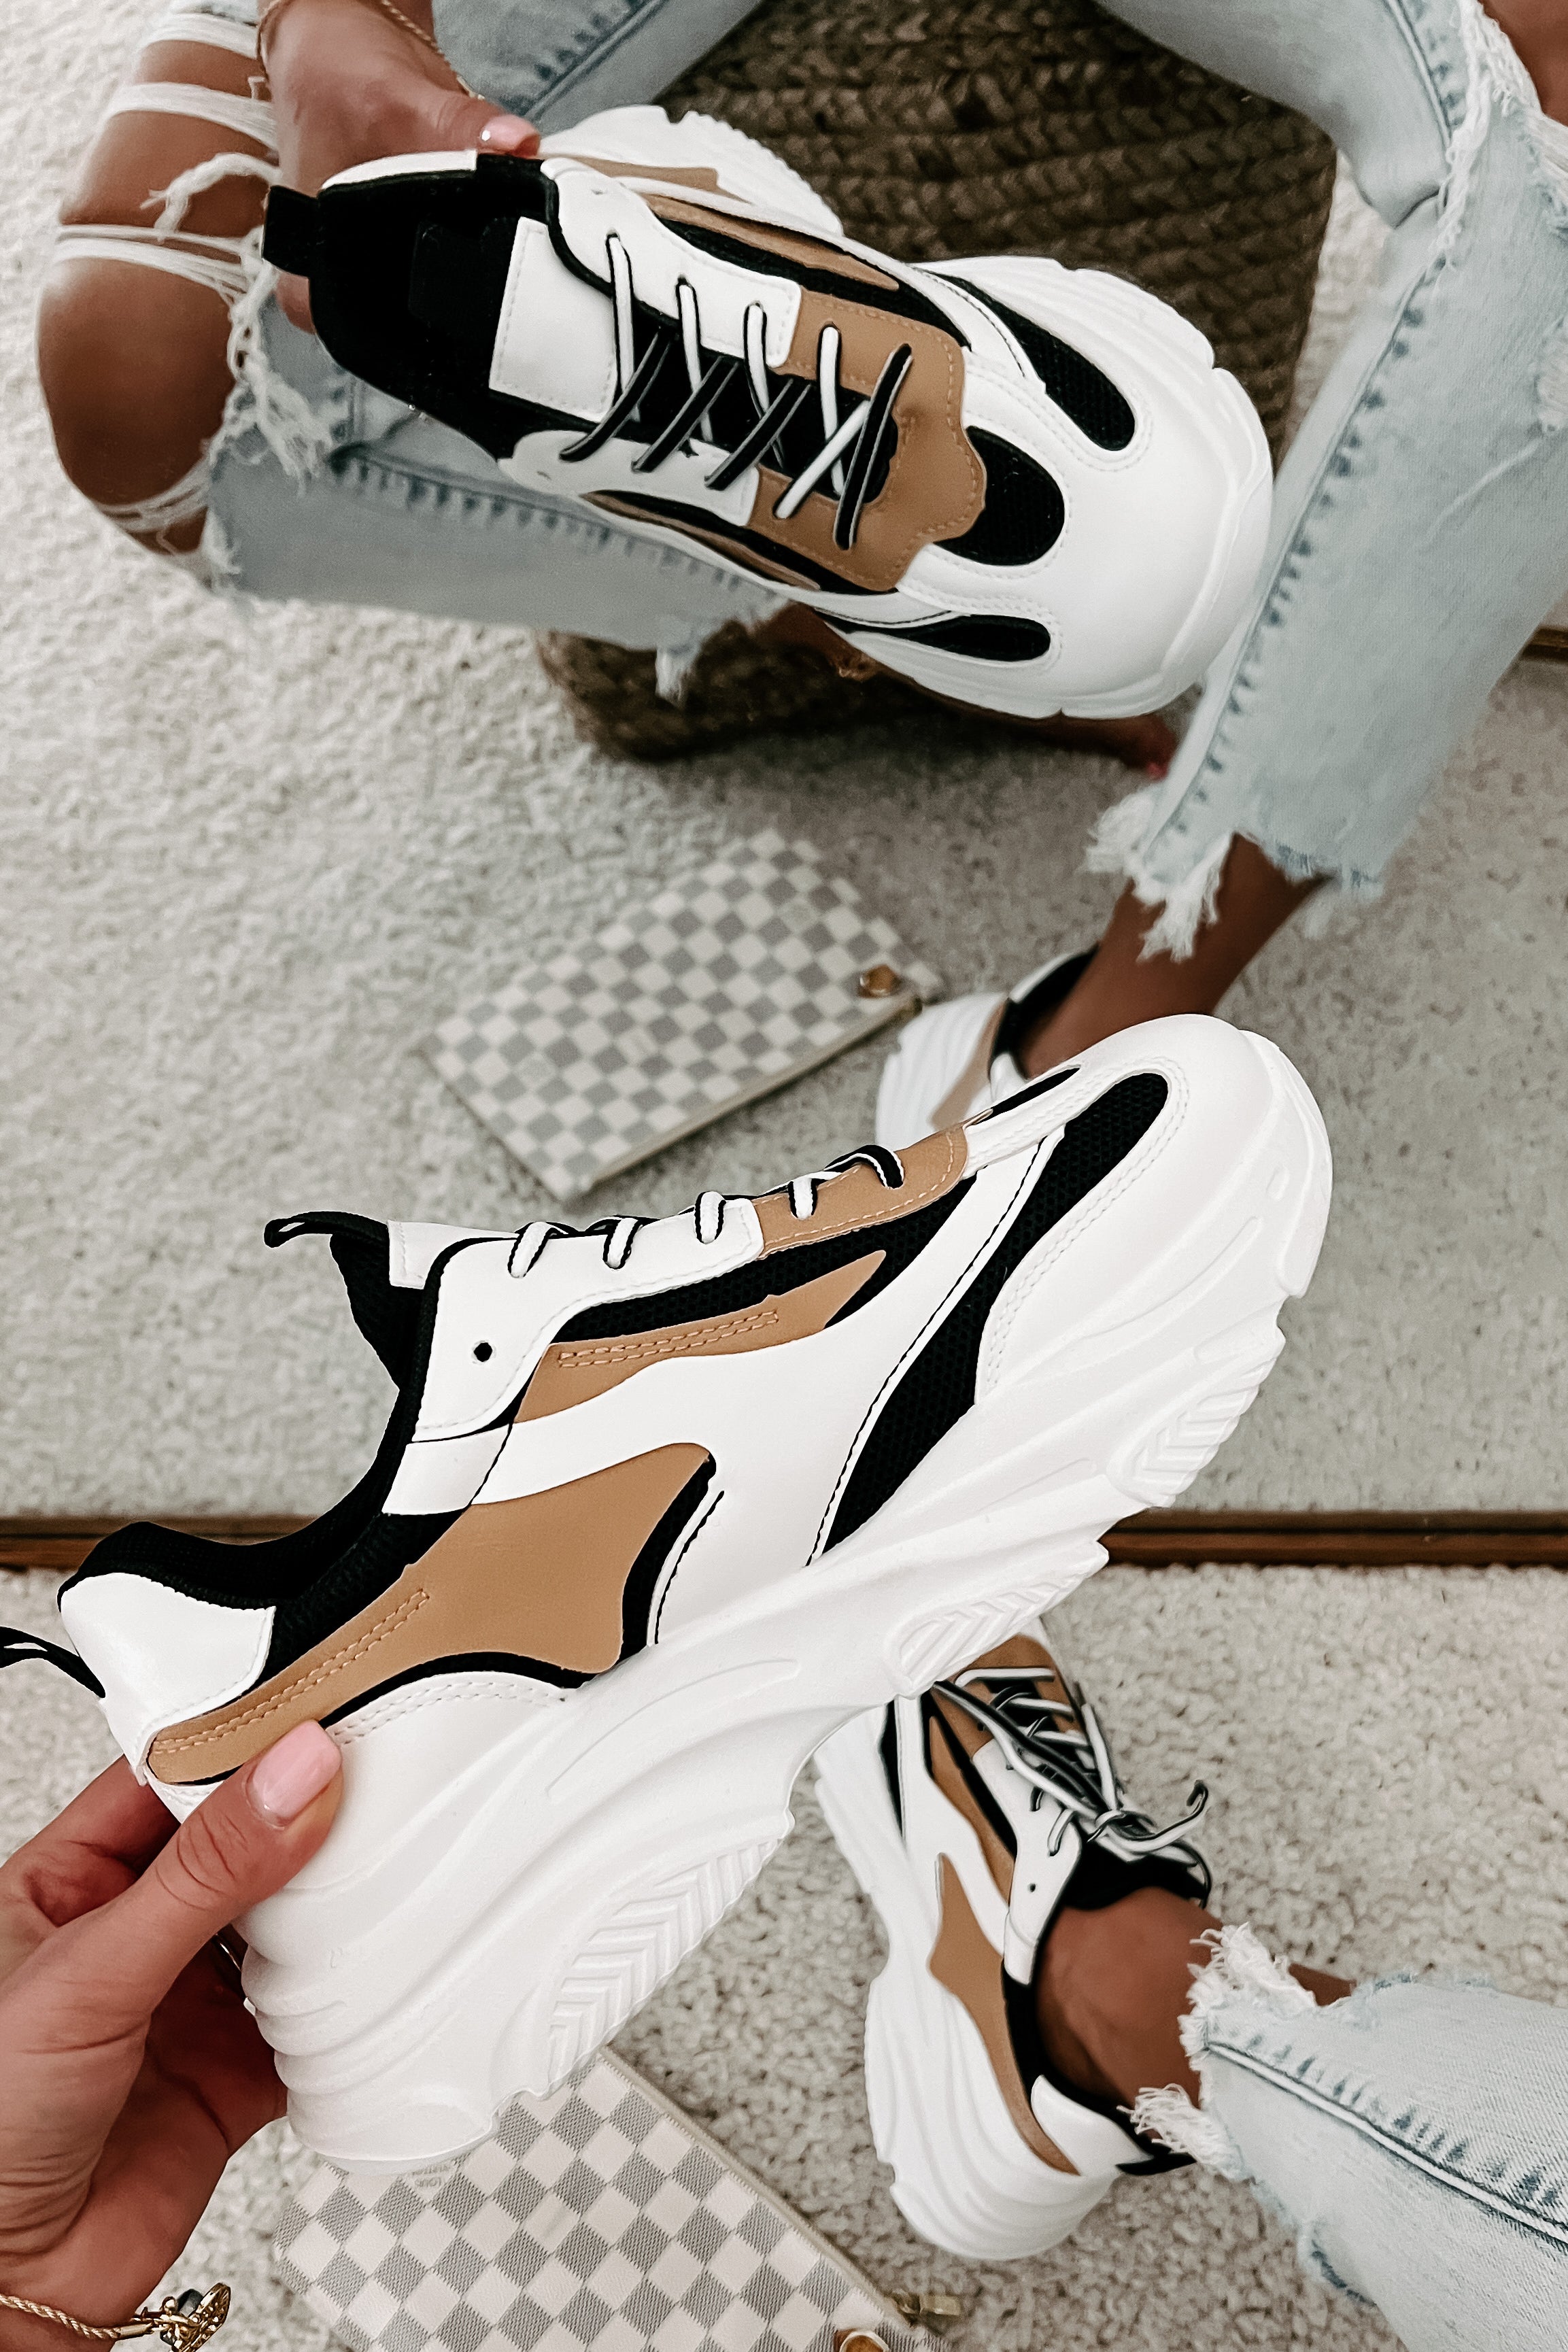 The 6 Chunky Sneakers You Need to Look 